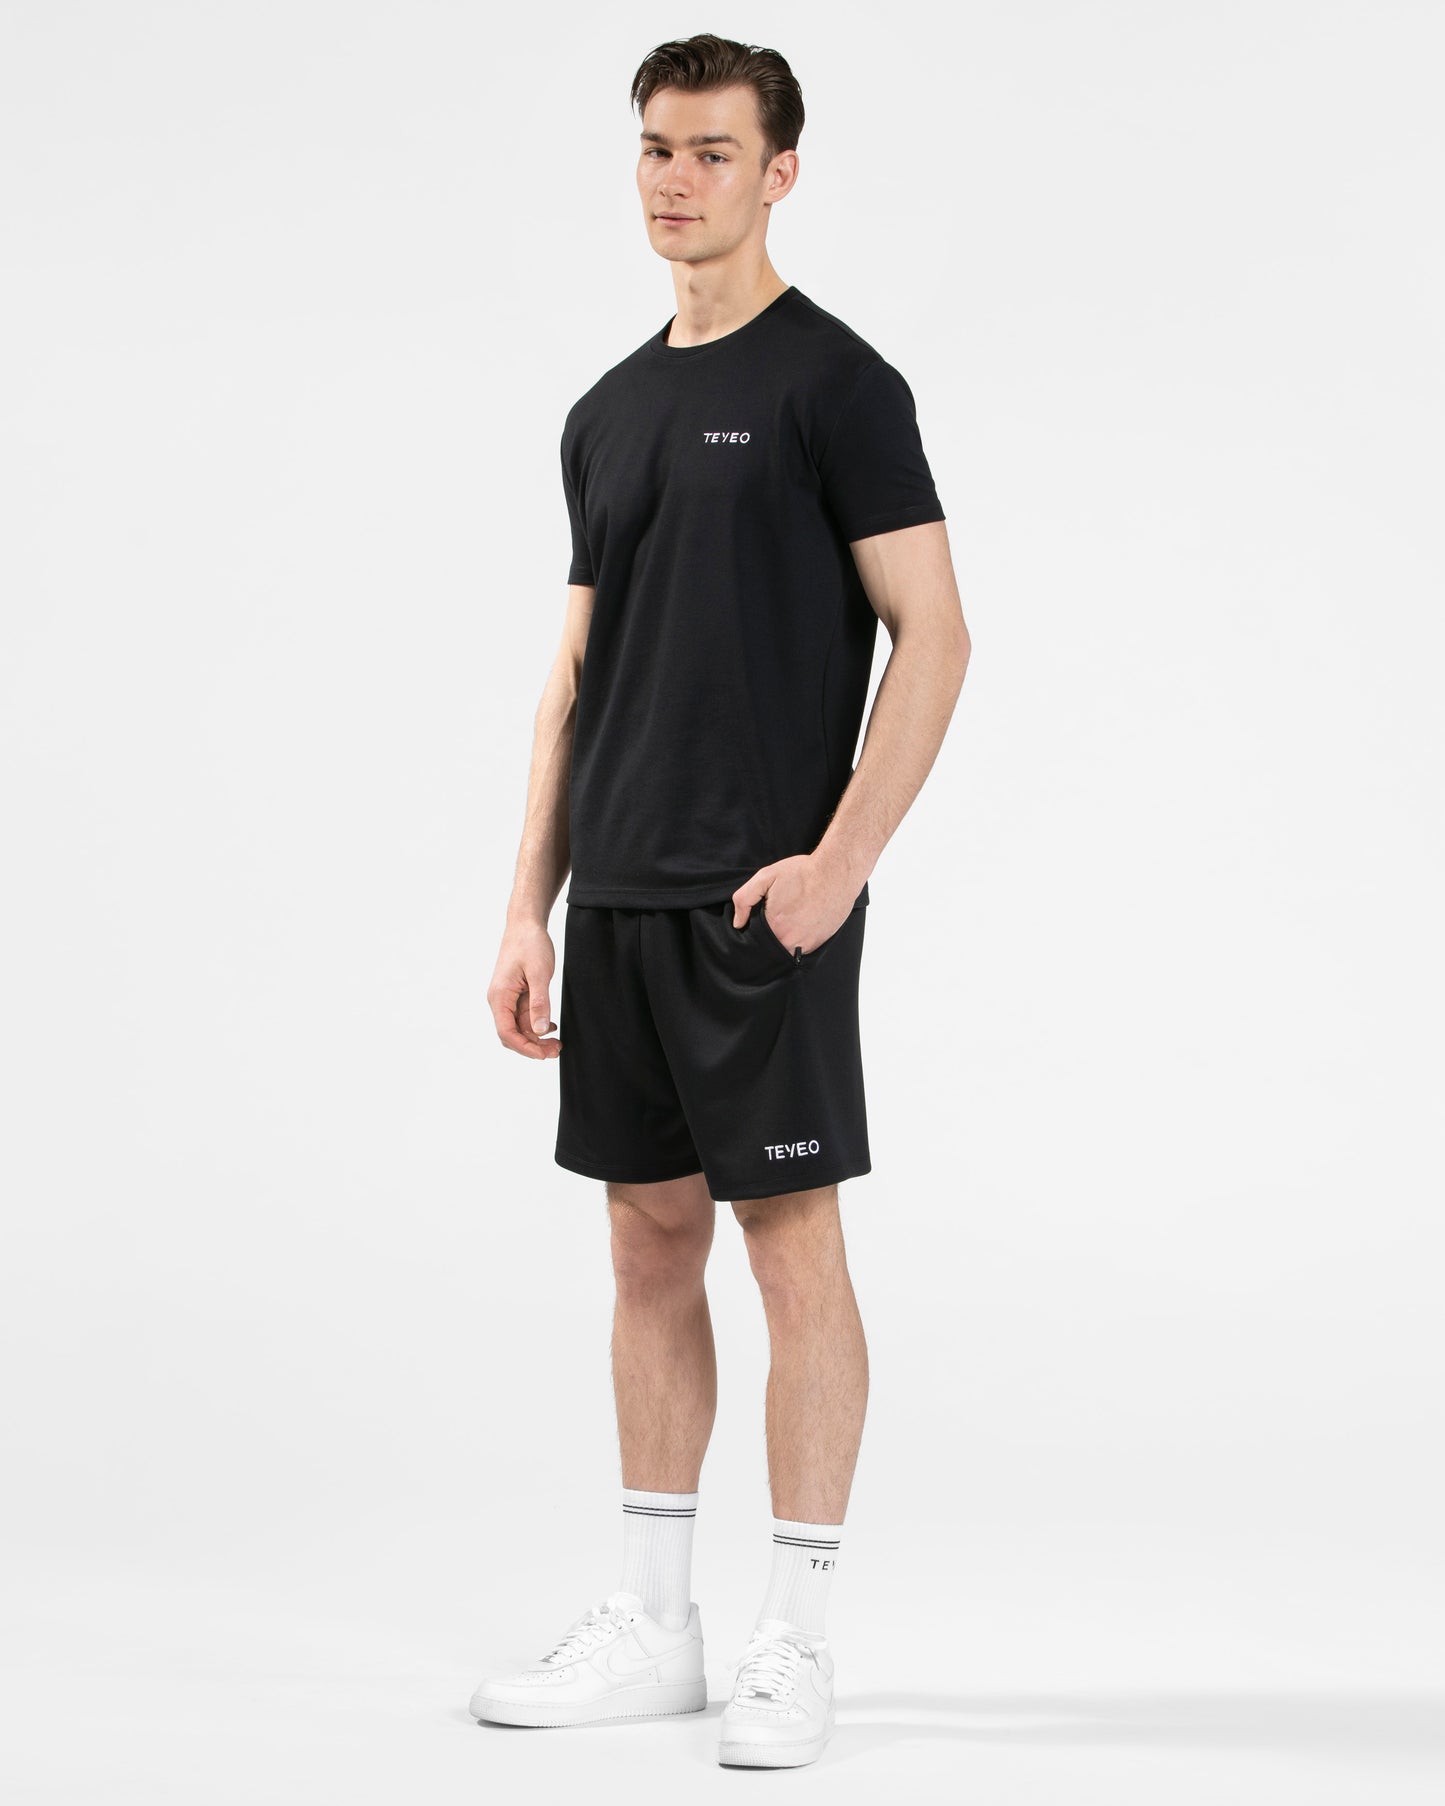 Arrival Fitted T-Shirt "Schwarz"